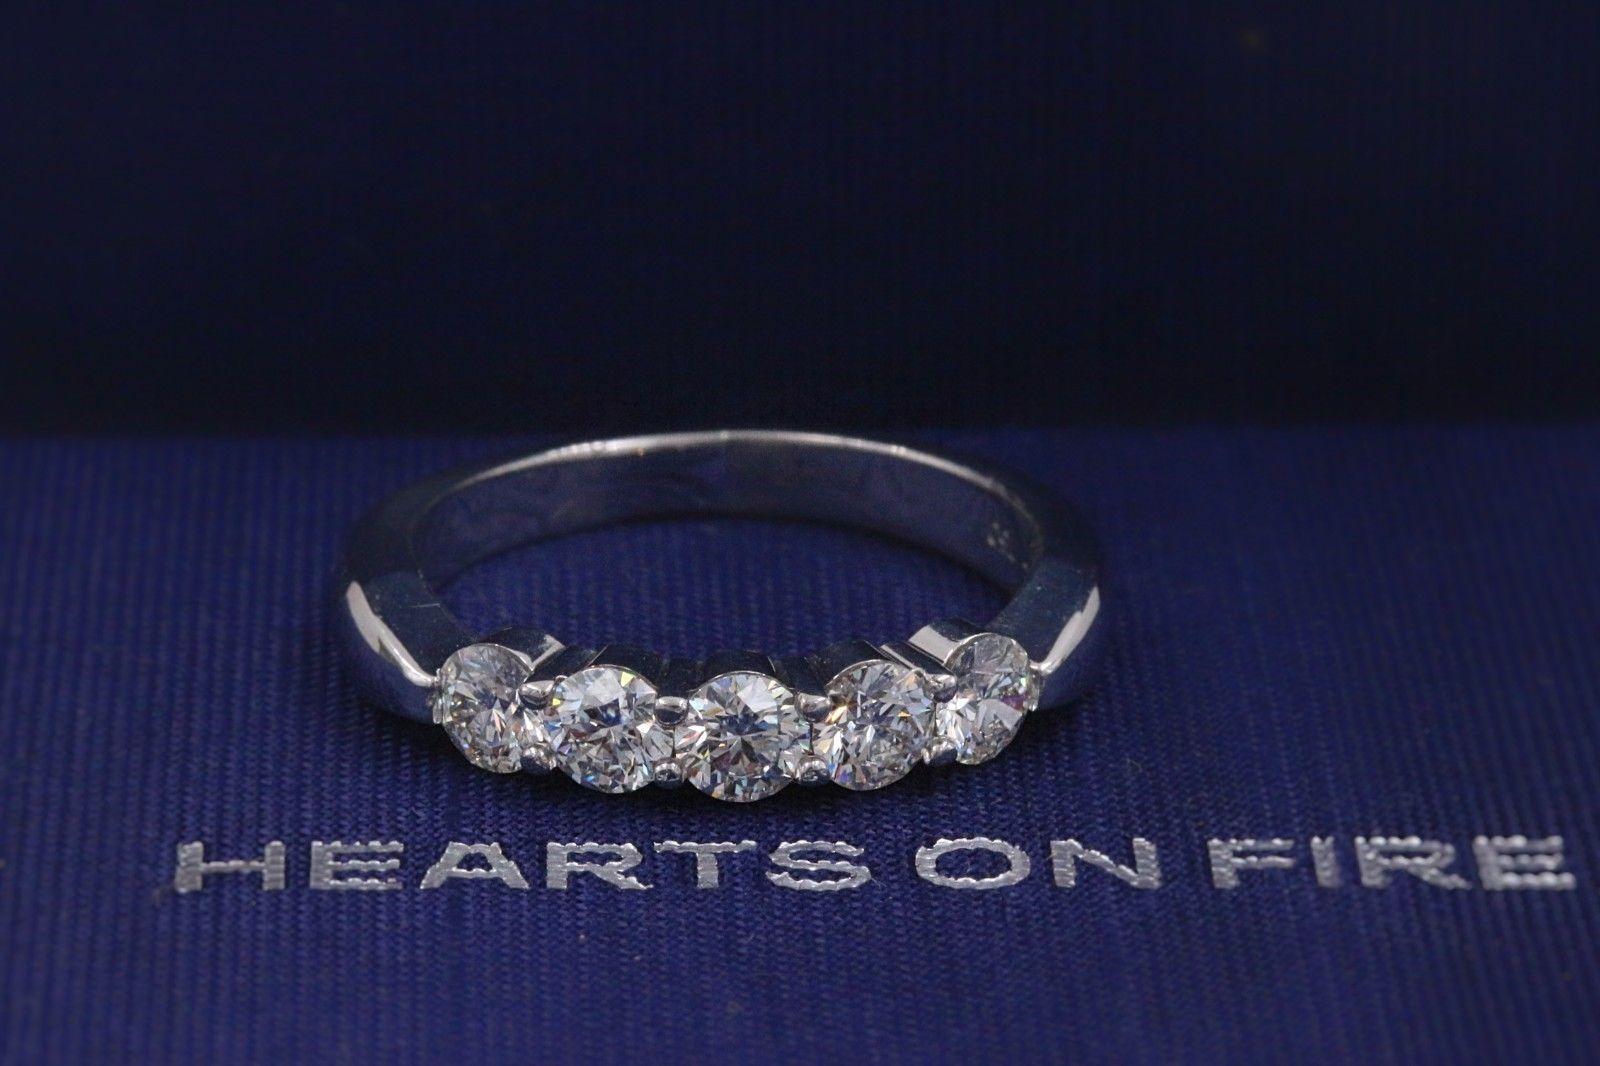 Hearts on Fire Multiplicity Love Diamant Ehering 18k Weißgold 1,20ct 2